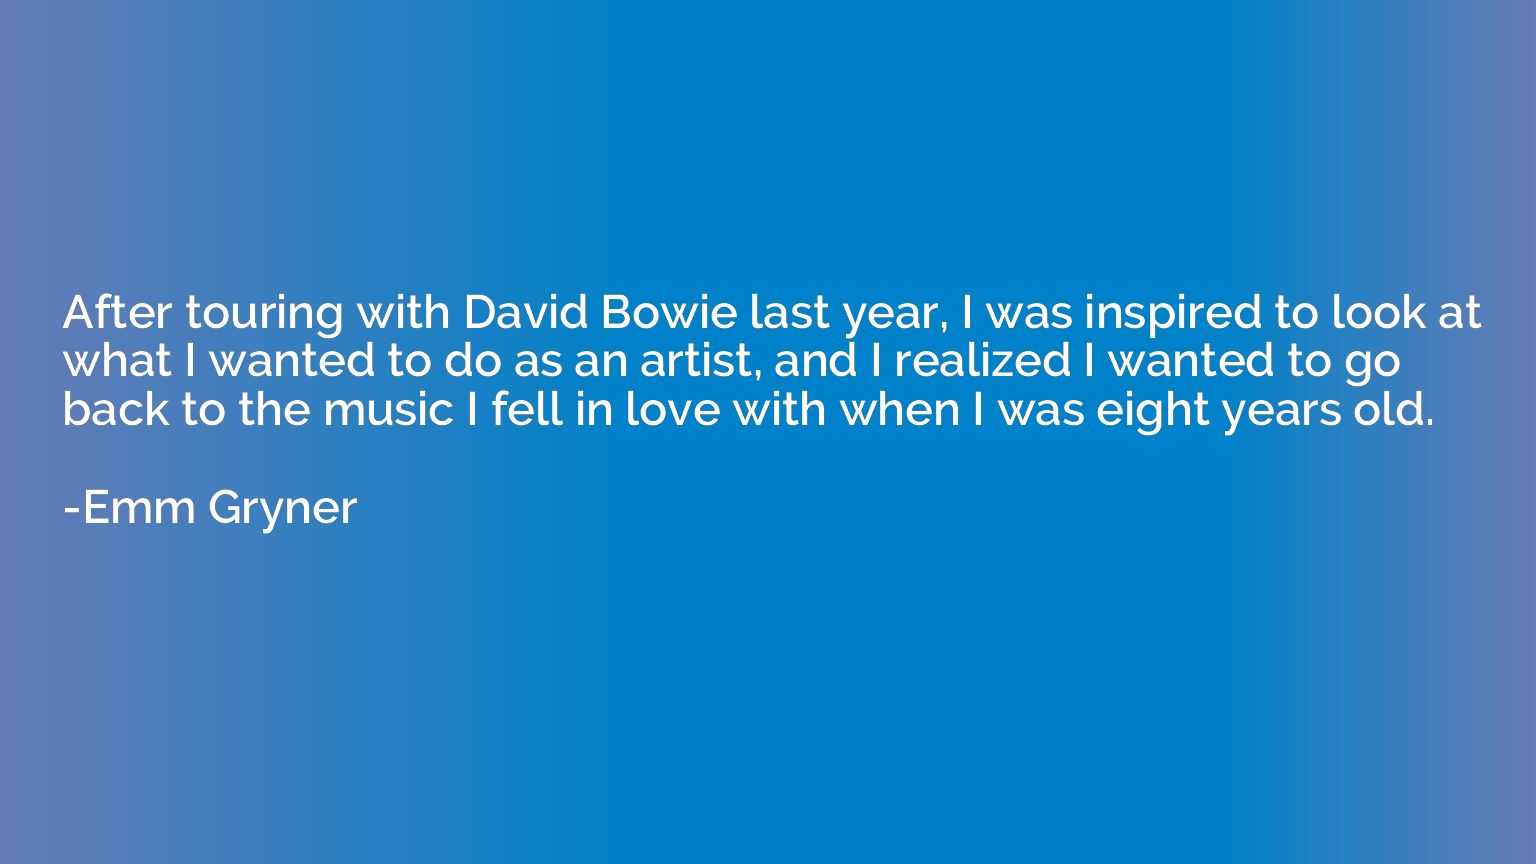 After touring with David Bowie last year, I was inspired to 